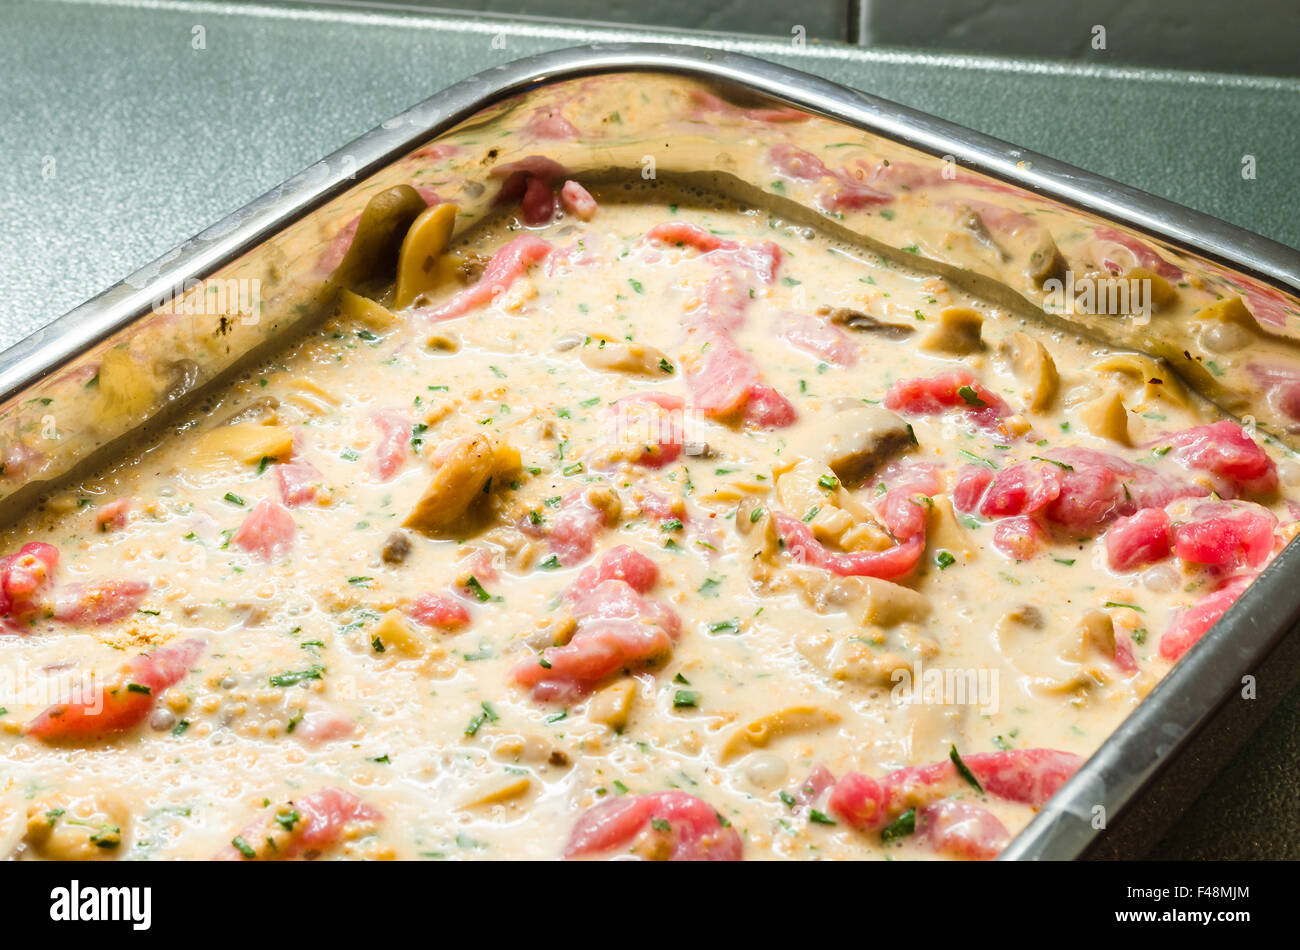 Baking dish with meat Stock Photo